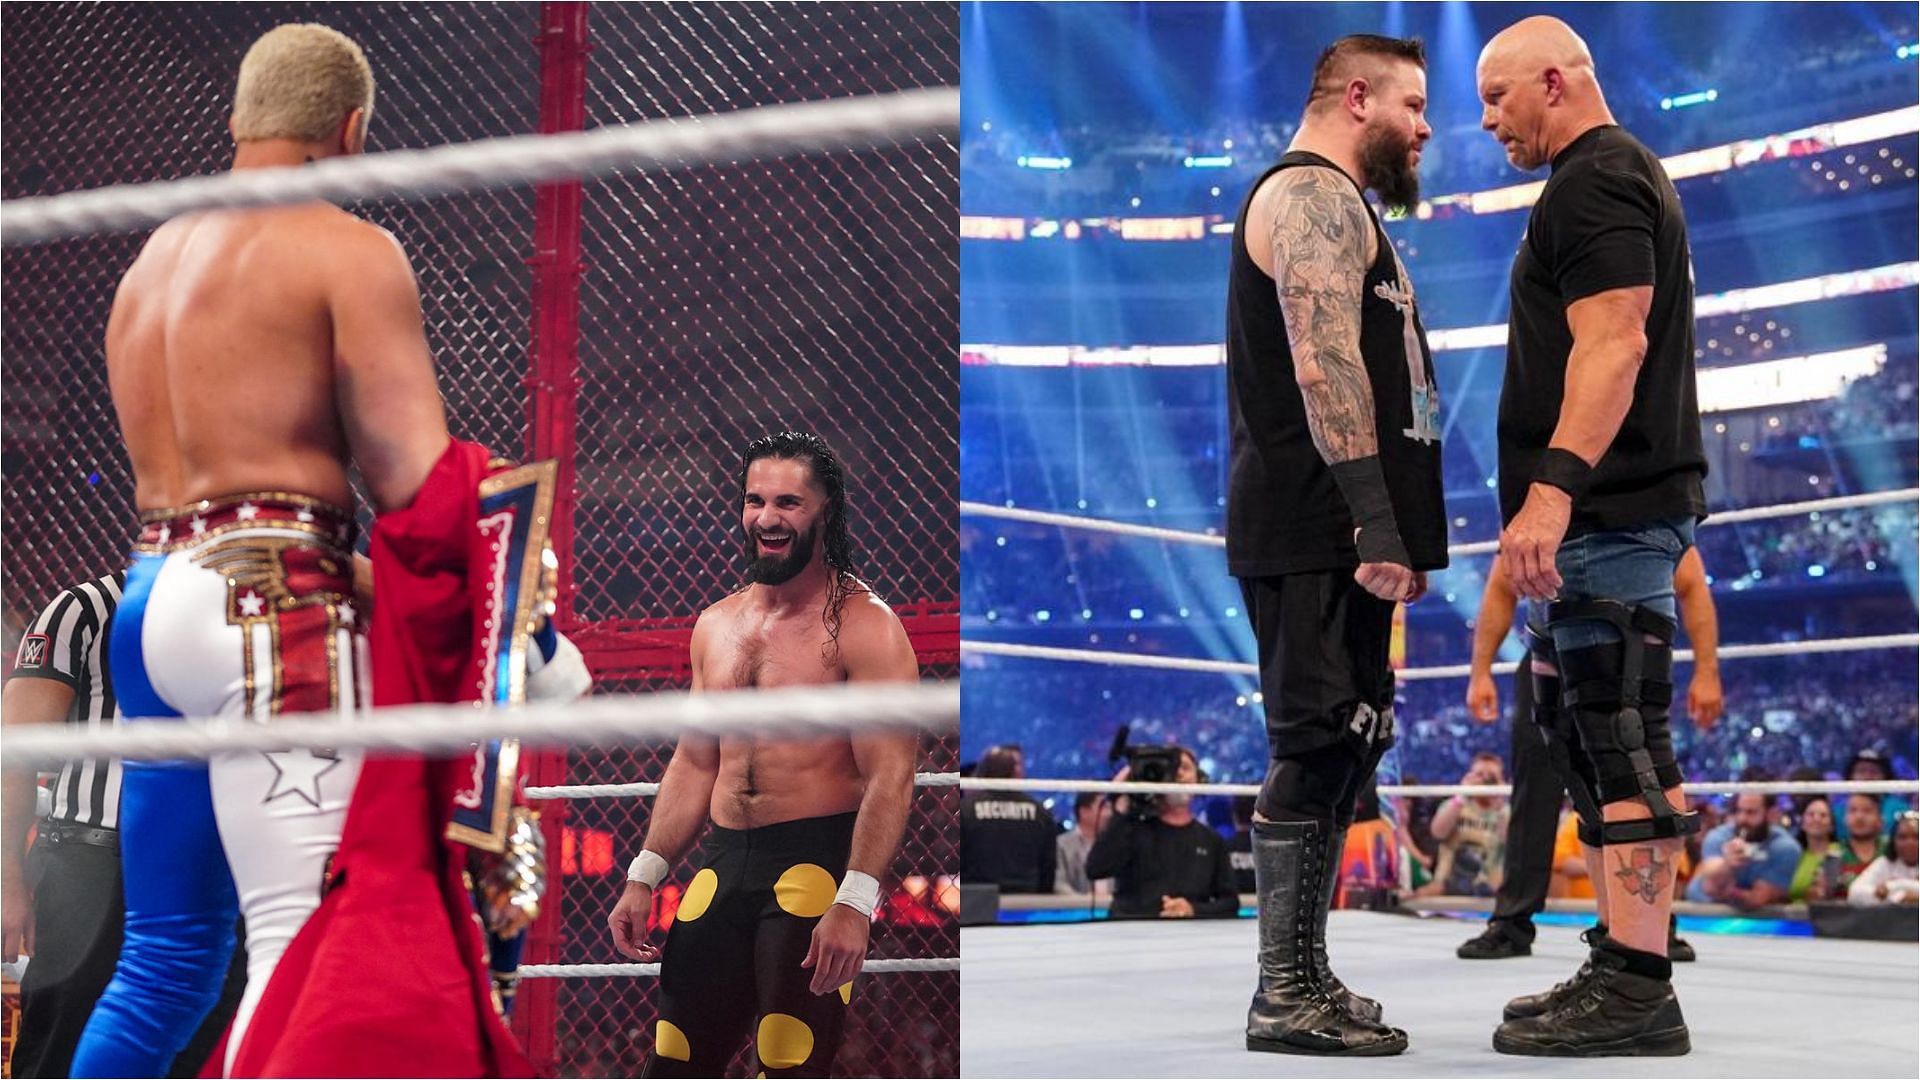 WWE has served up plenty of memorable big matches in 2022